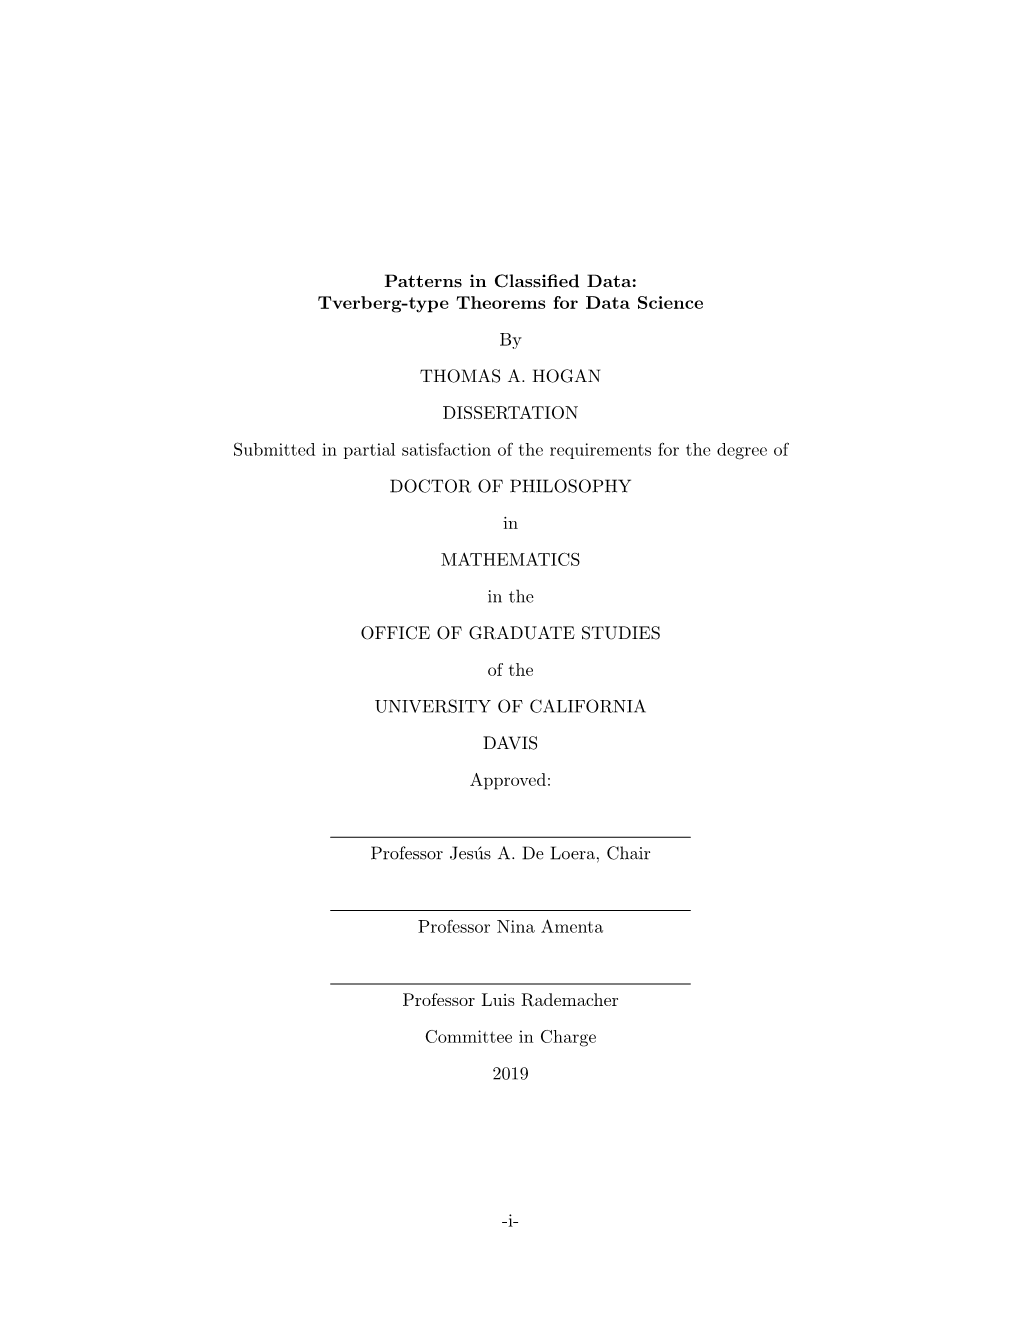 Patterns in Classified Data: Tverberg-Type Theorems for Data Science by THOMAS A. HOGAN DISSERTATION Submitted in Partial Satisf